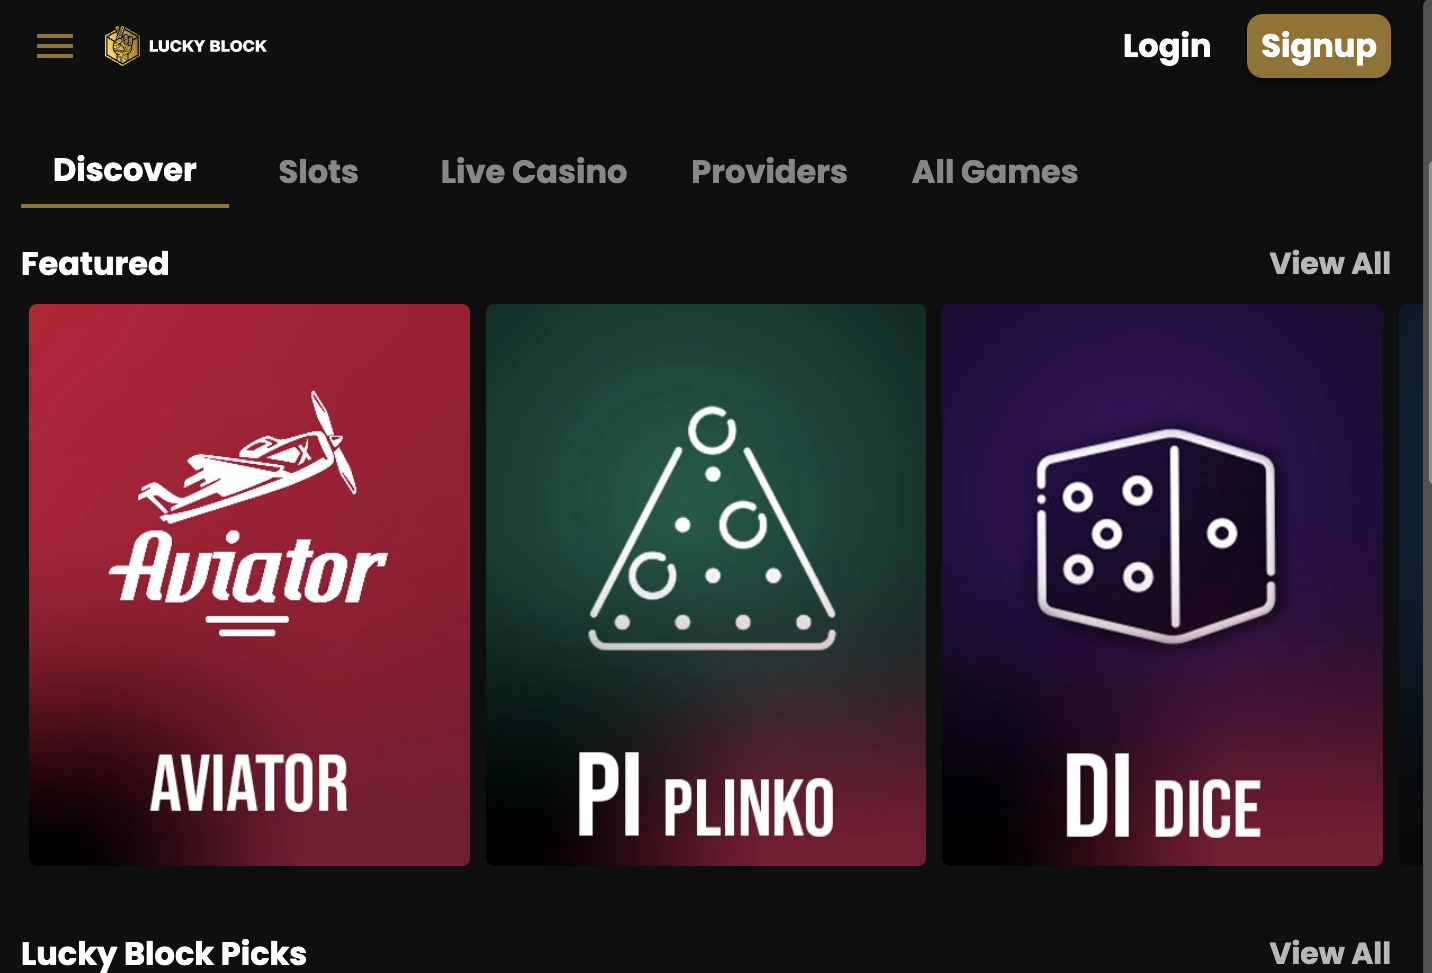 Is crypto casino guides Making Me Rich?